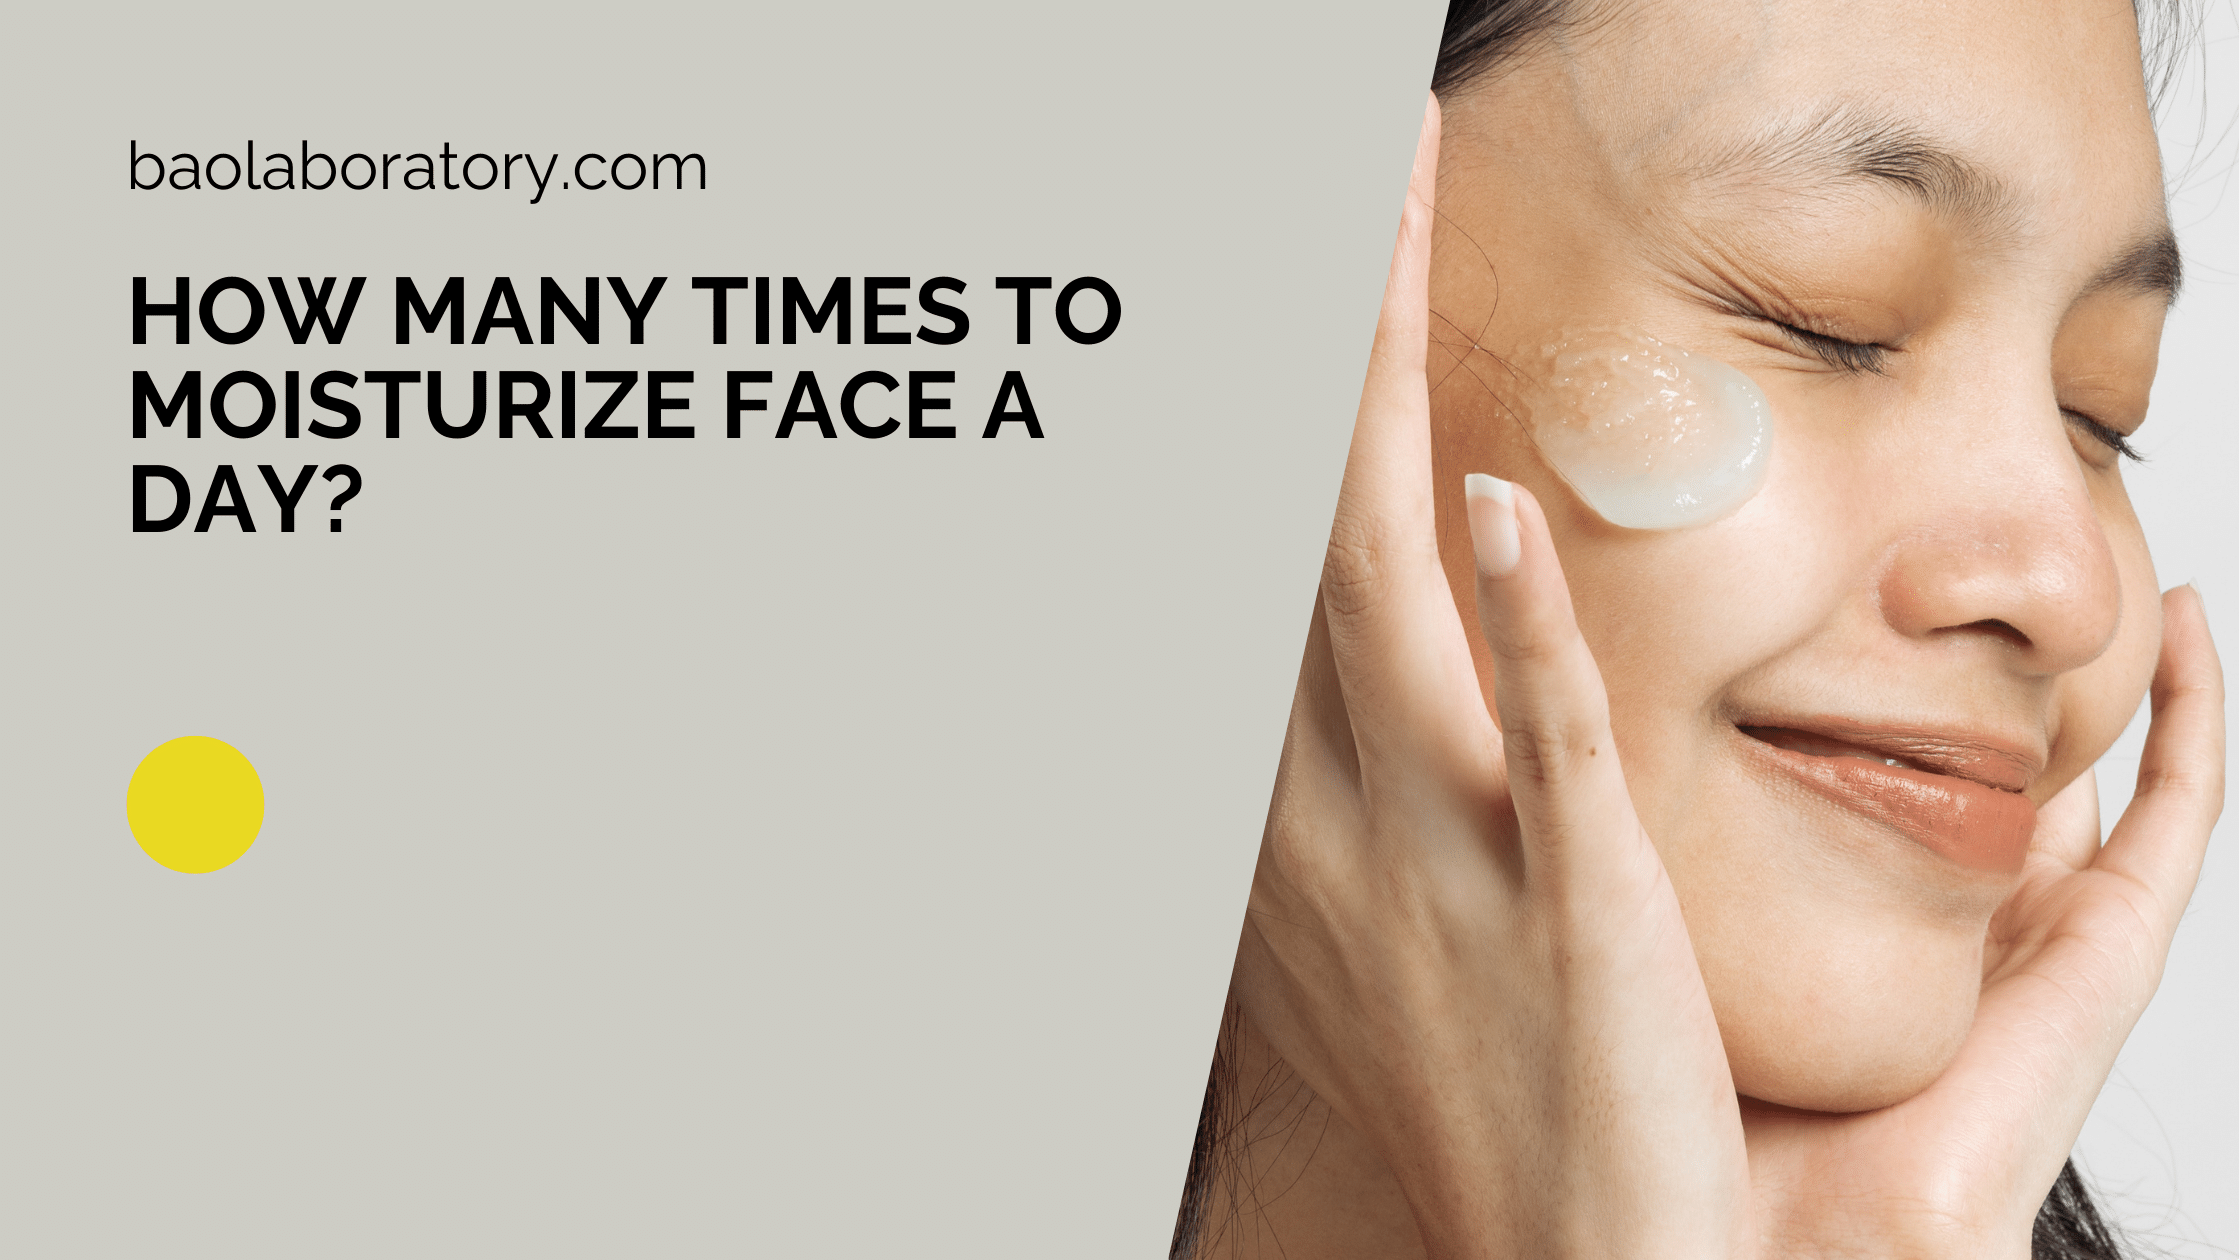 How Many Times to Moisturize Face a Day